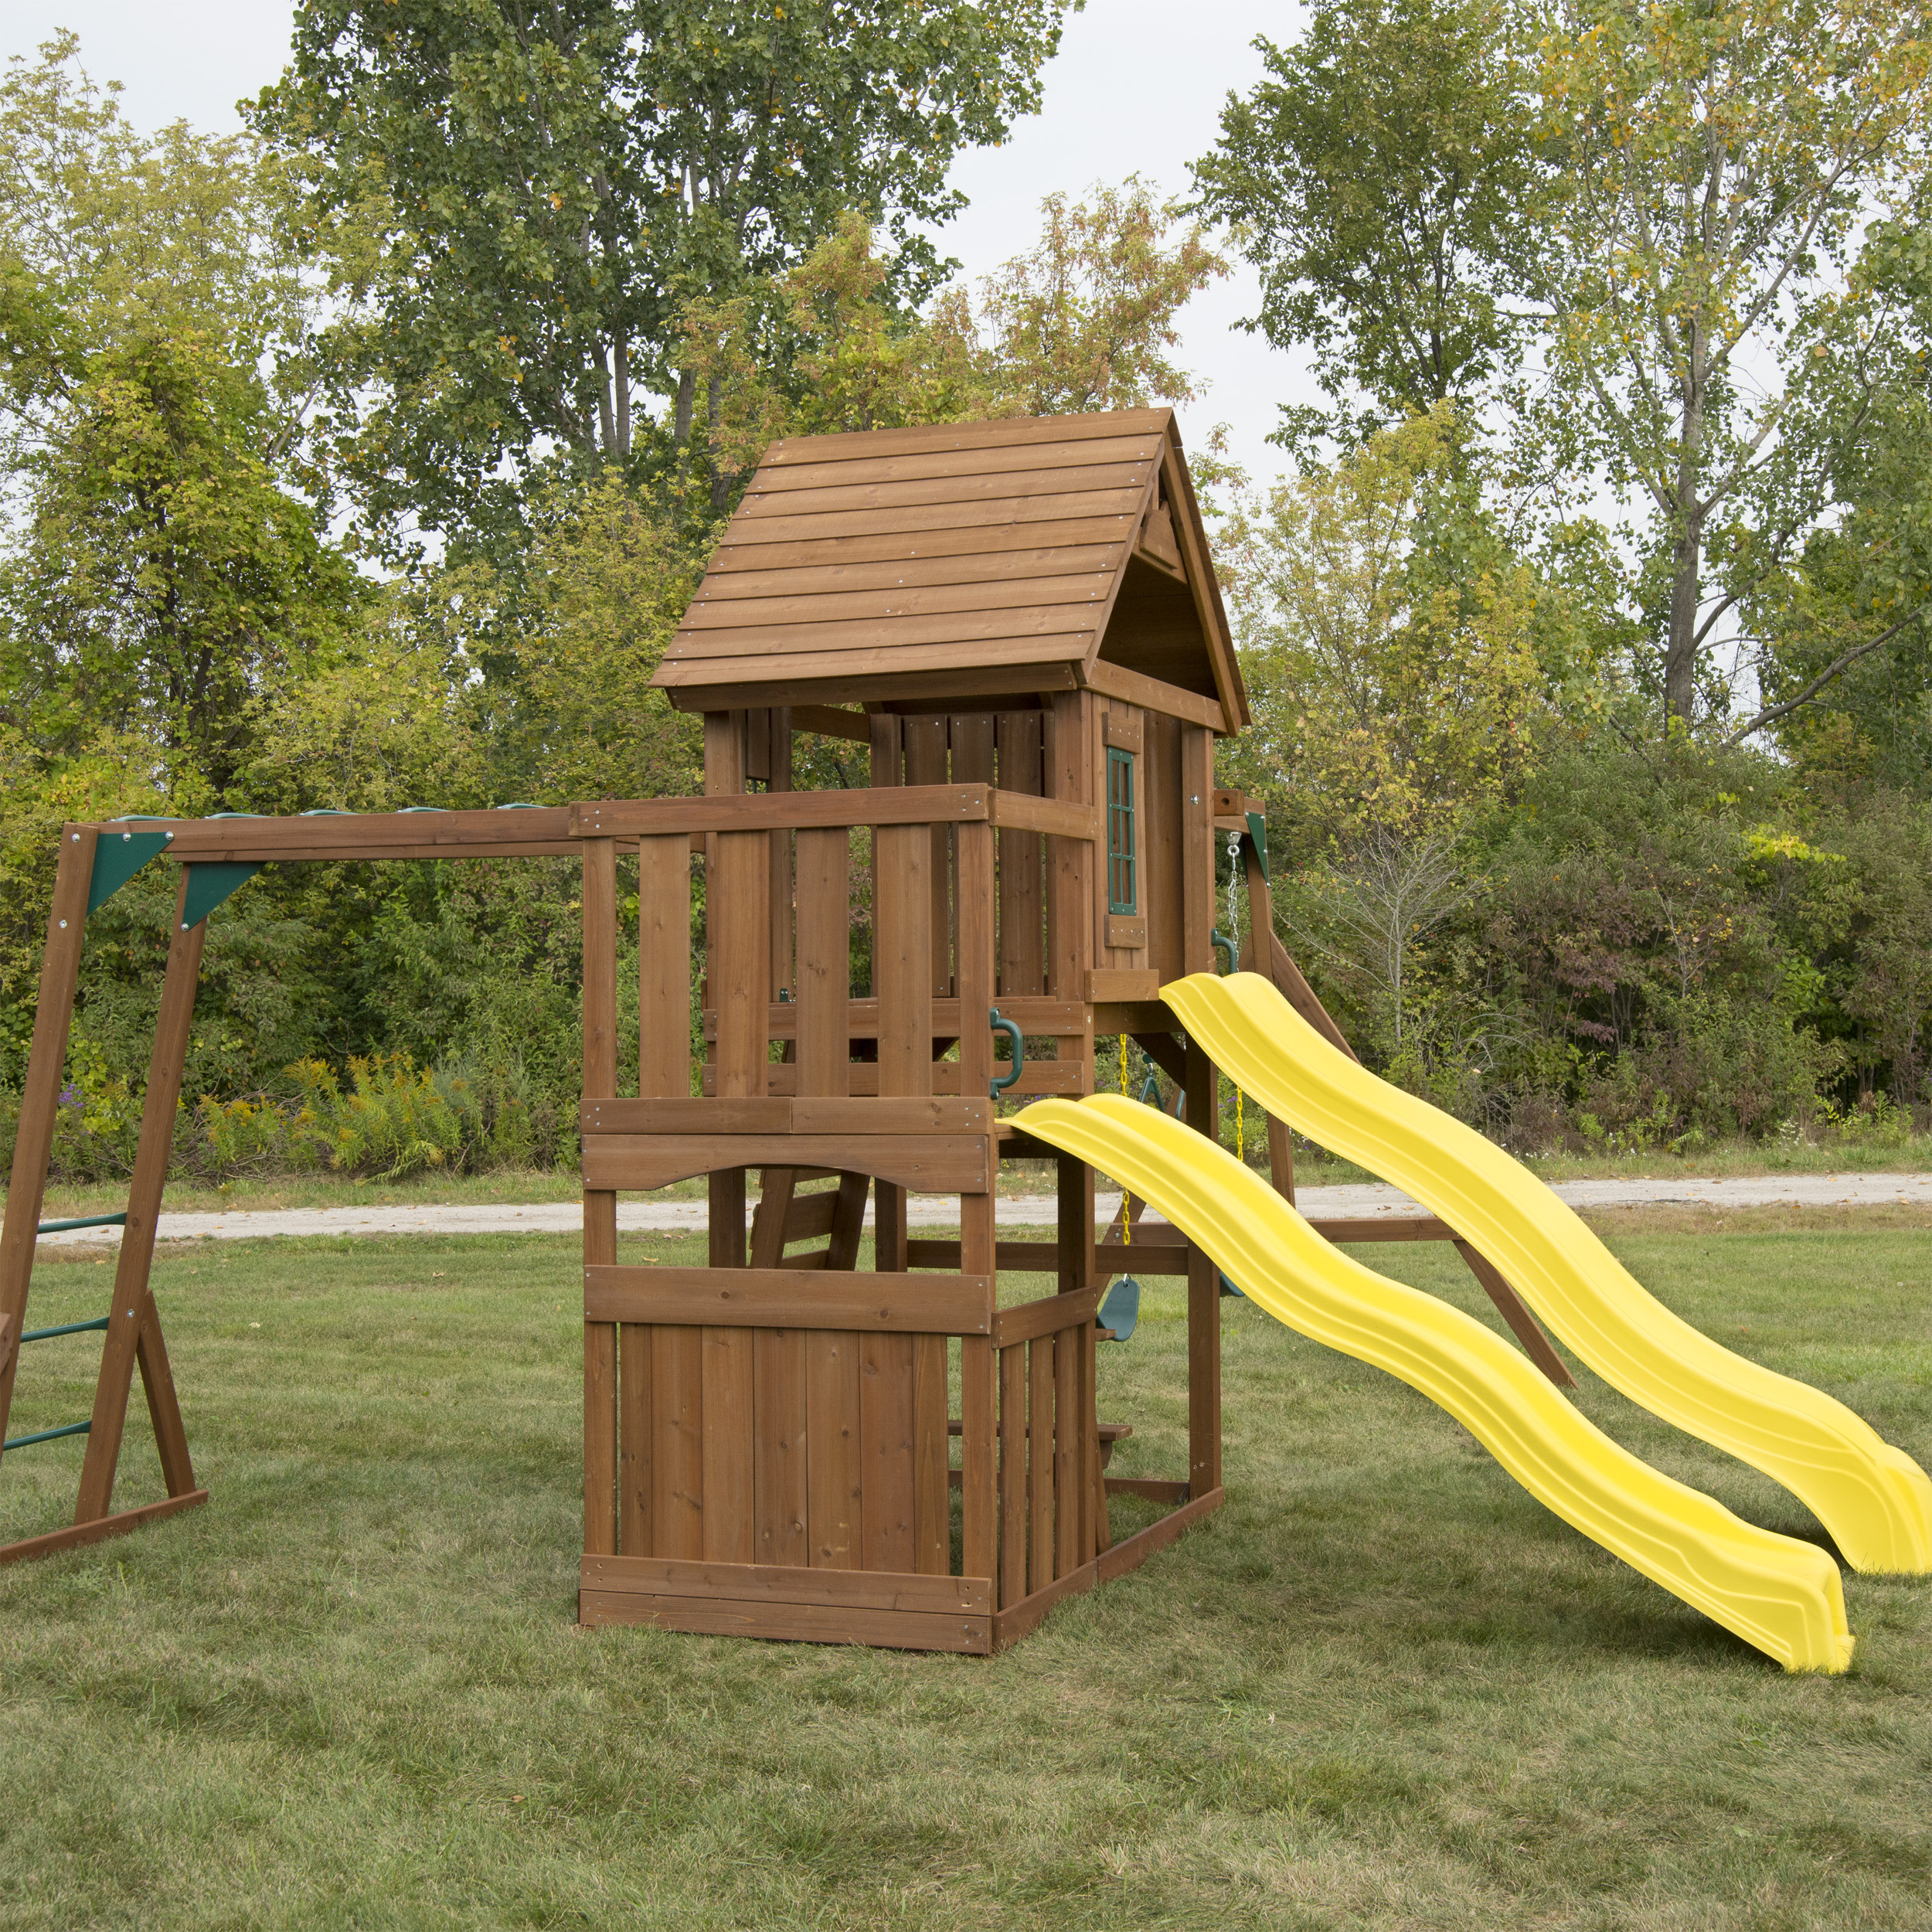 Swing-N-Slide Timberview Wooden Backyard Swing Set with Two Yellow Wave Slides, Wood Roof, Swings, and Monkey Bars - image 5 of 12